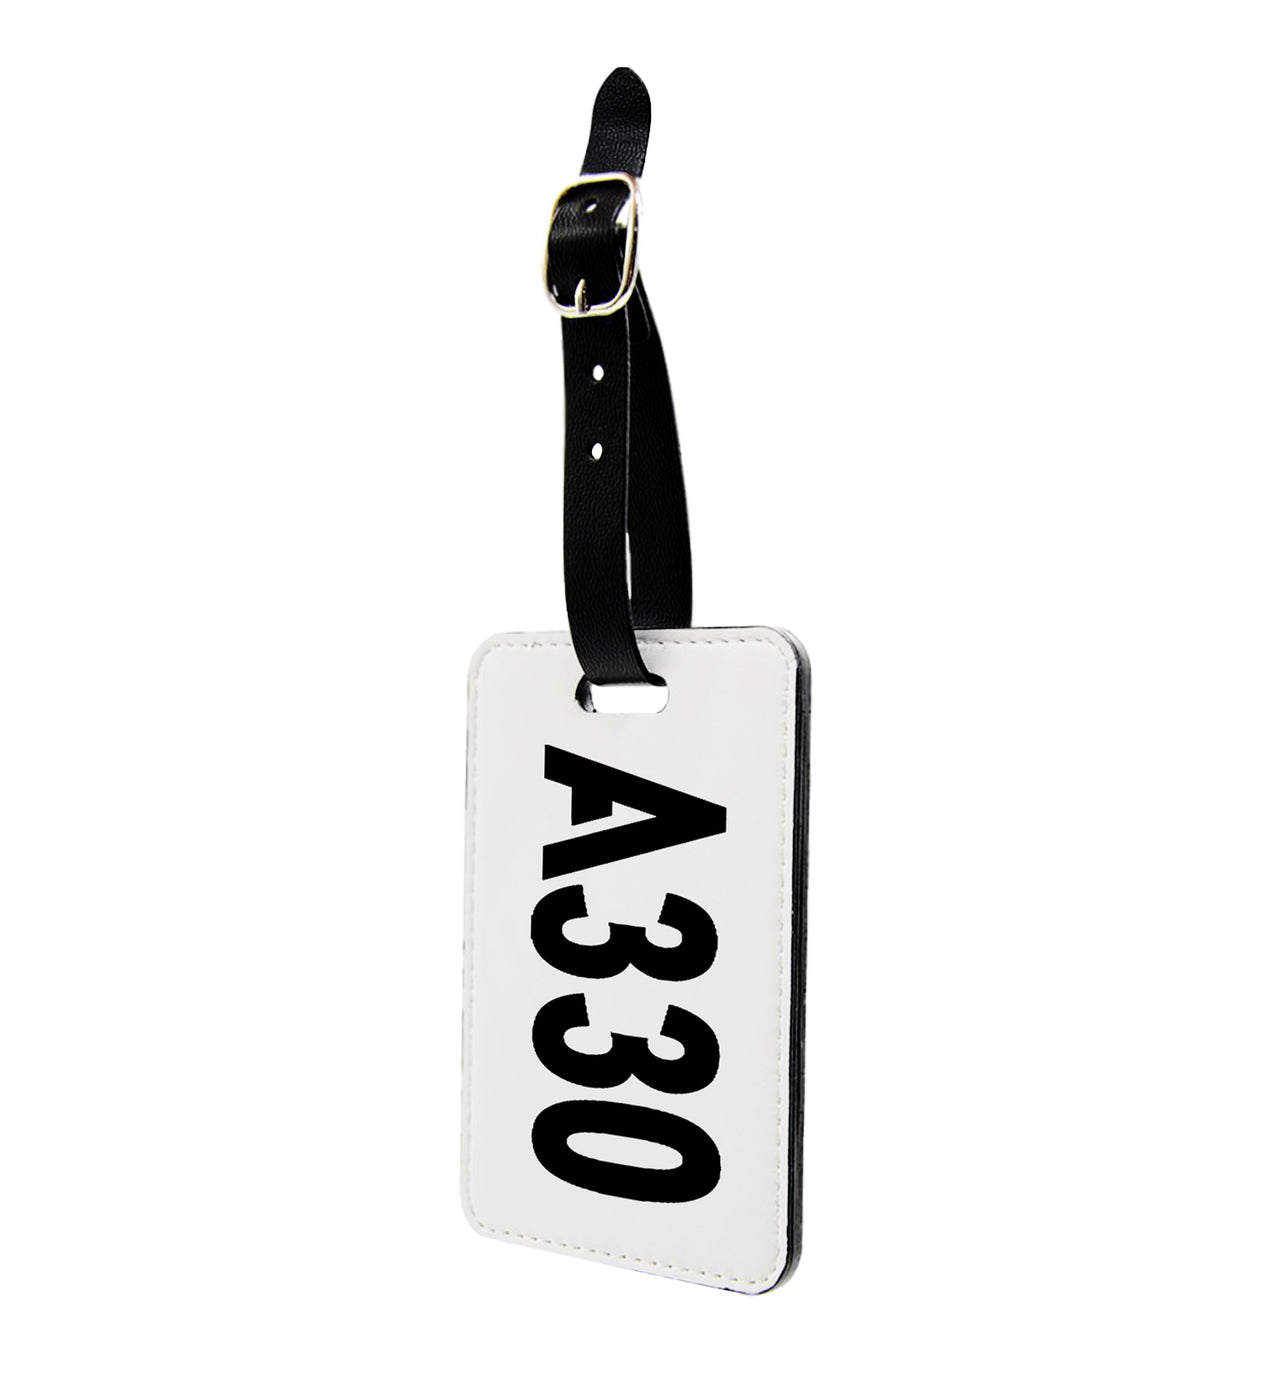 A330 Text Designed Luggage Tag